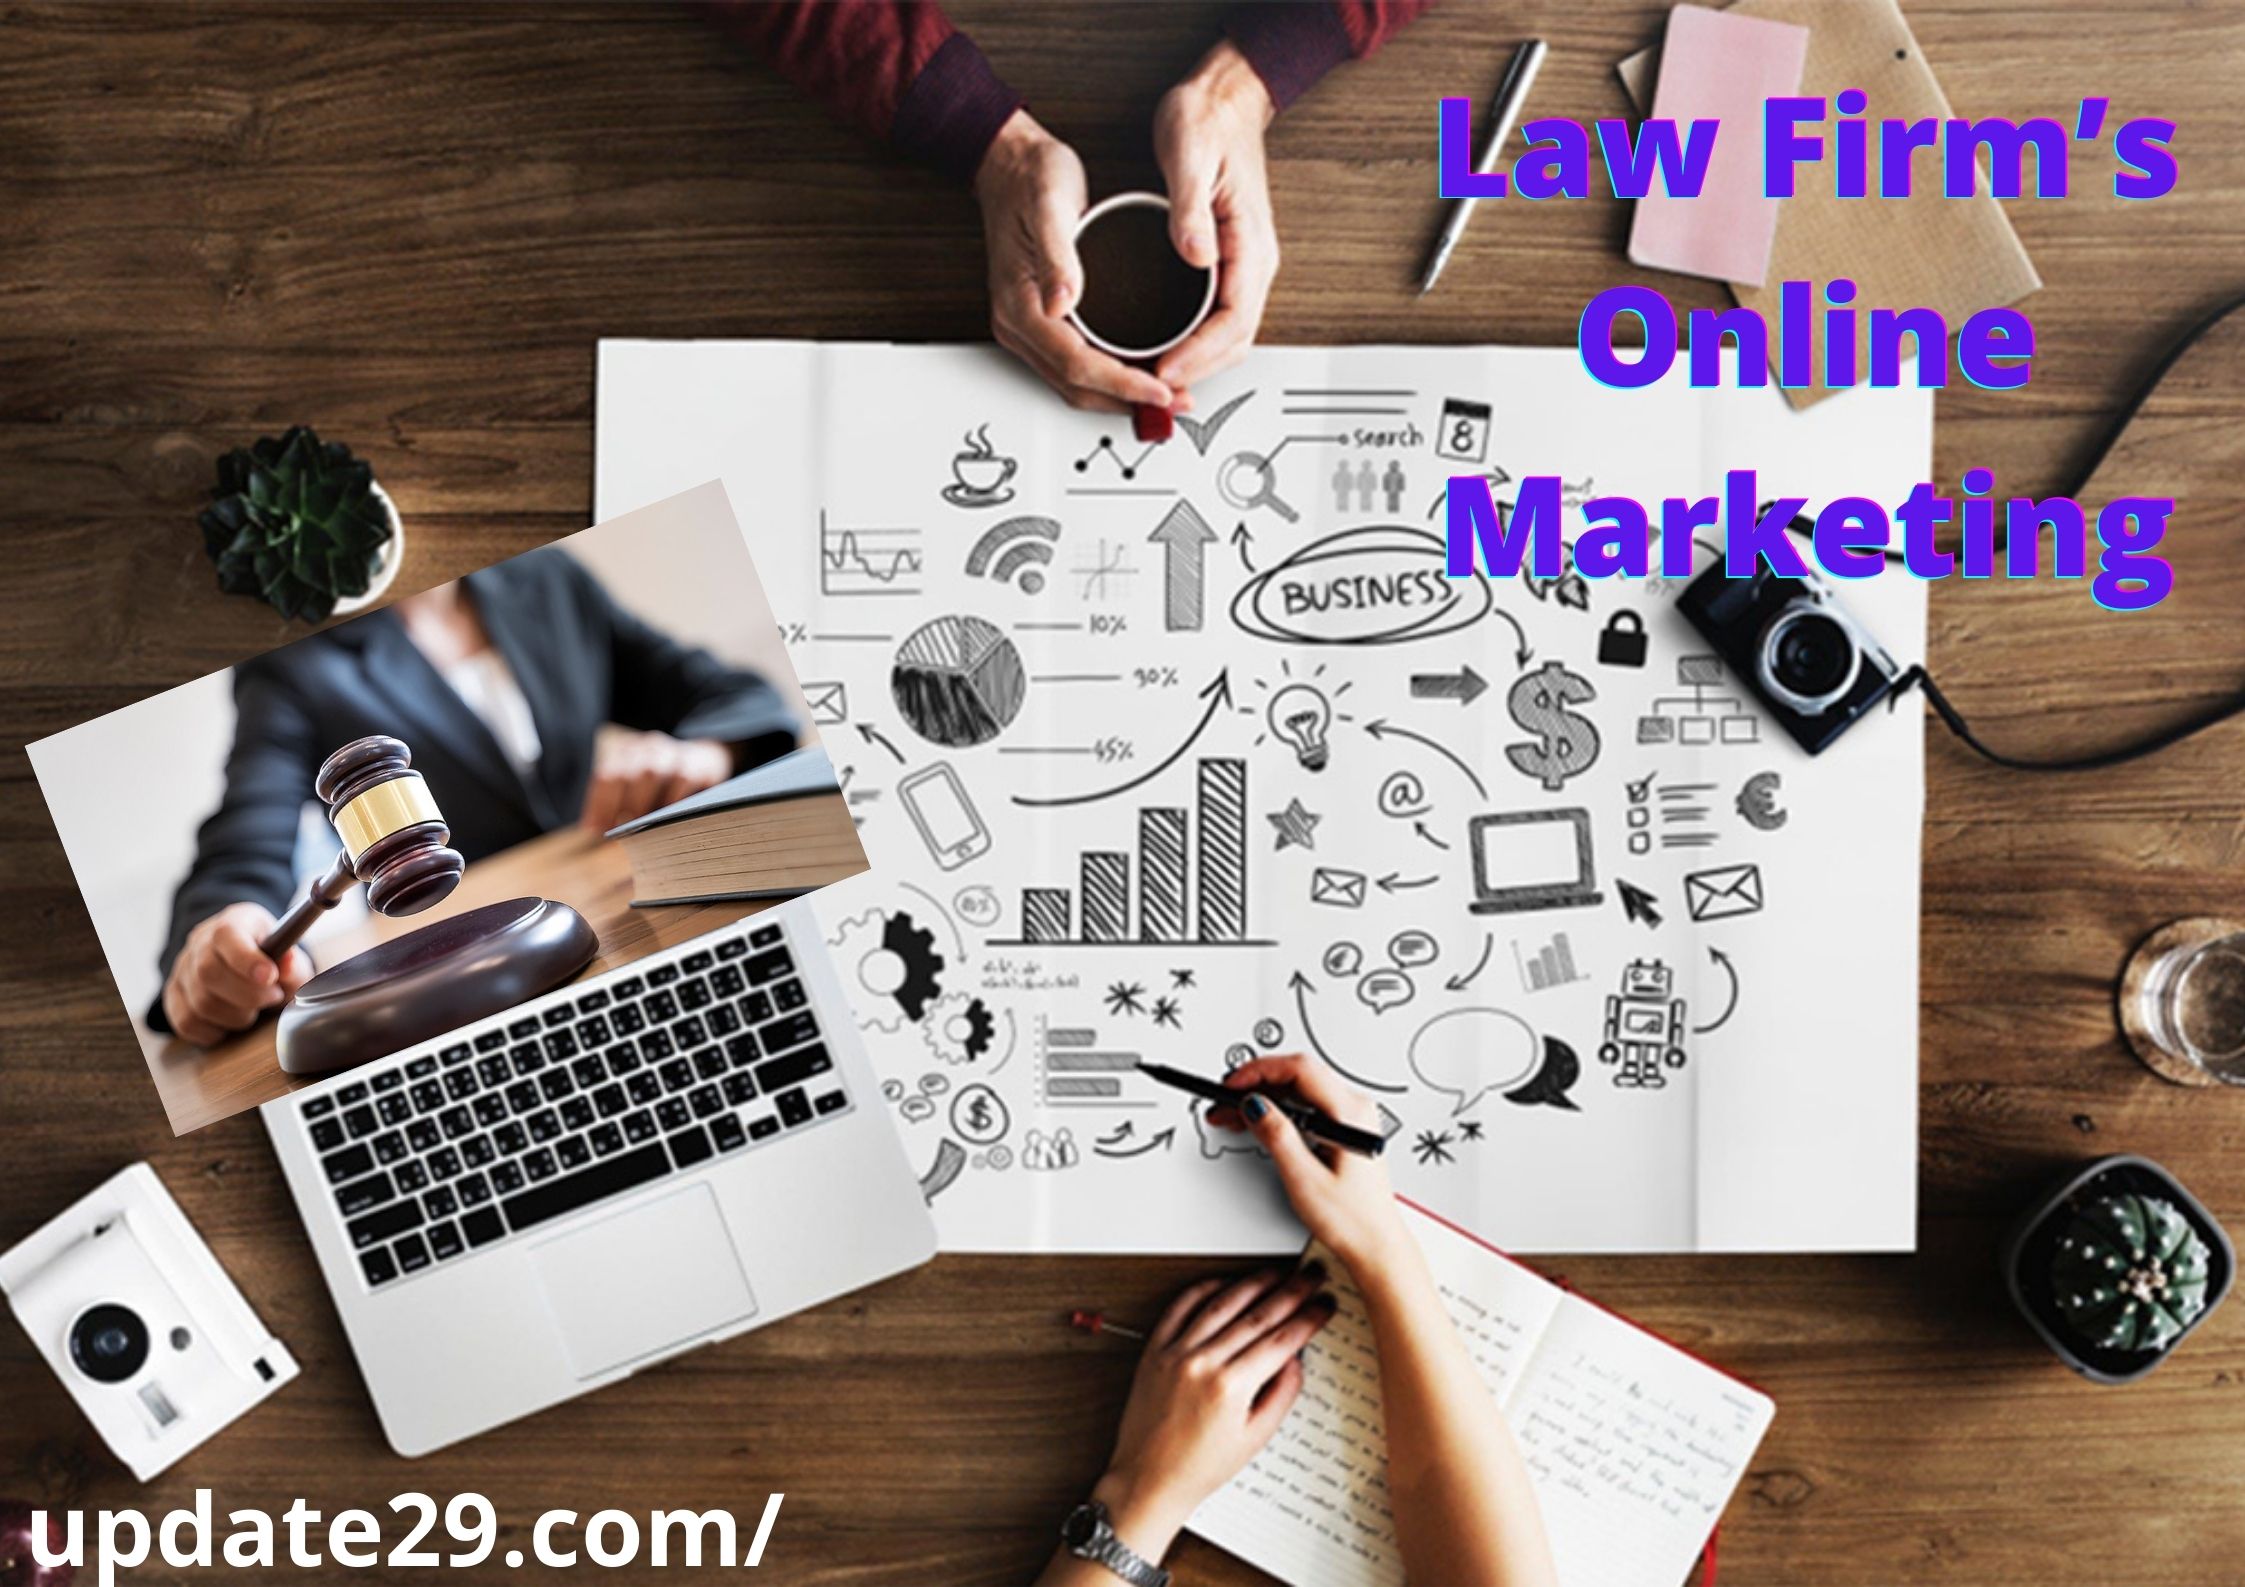 Law Firm's Online Marketing